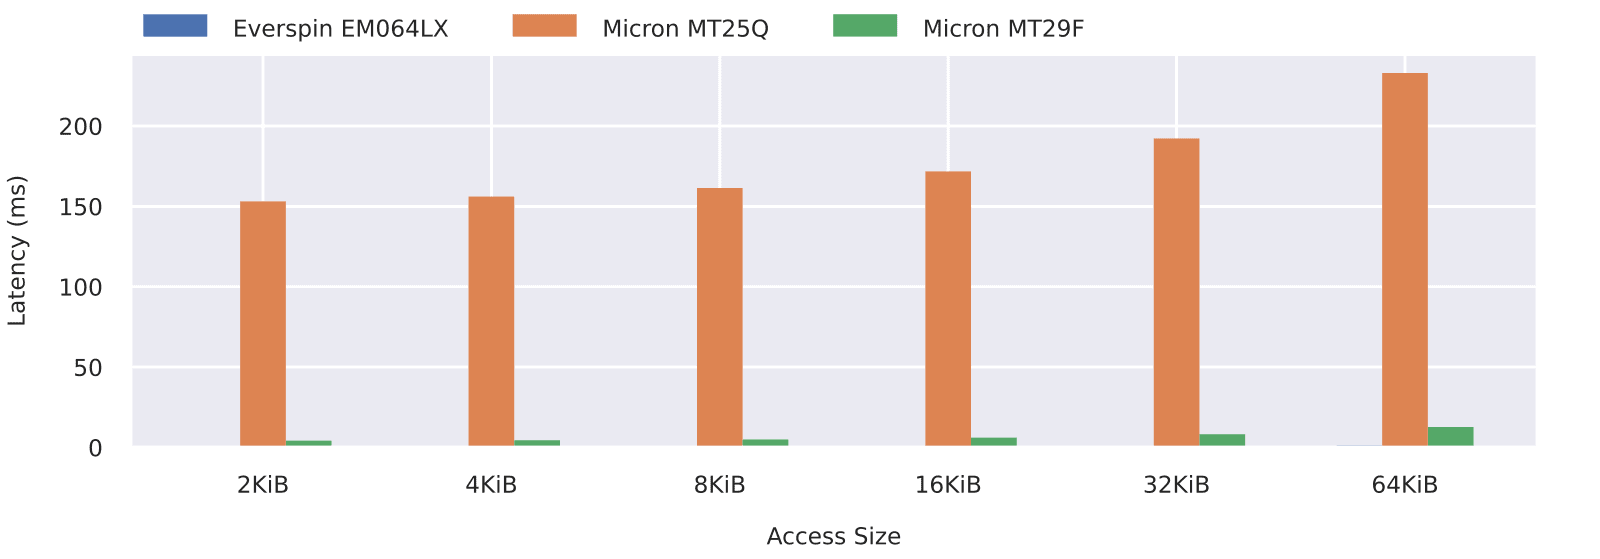 Bar graph of worst cast write latency versus access size benchmark results for the Everspin EM064LX MRAM, Micron MT25Q NOR Flash and Micron MT29F NAND Flash non-volatile memories.